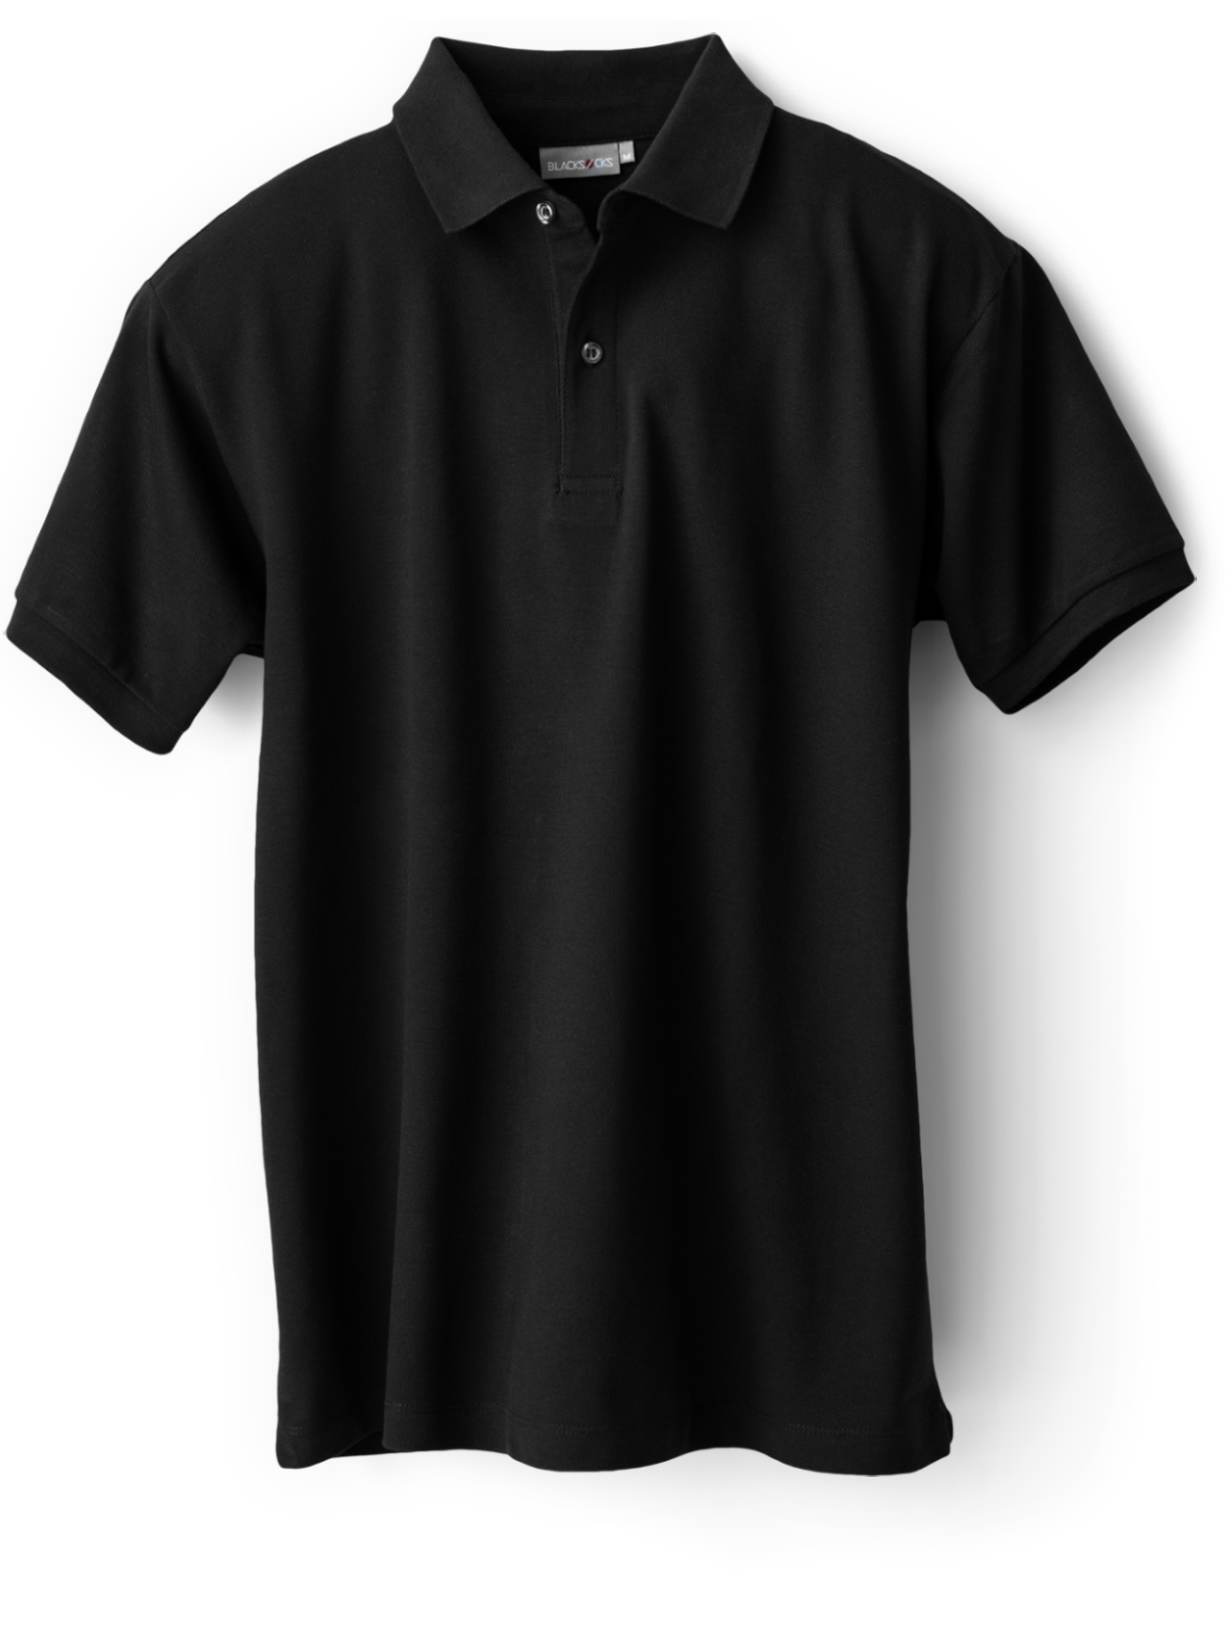 Polo Shirt PNG Image Transparent Background